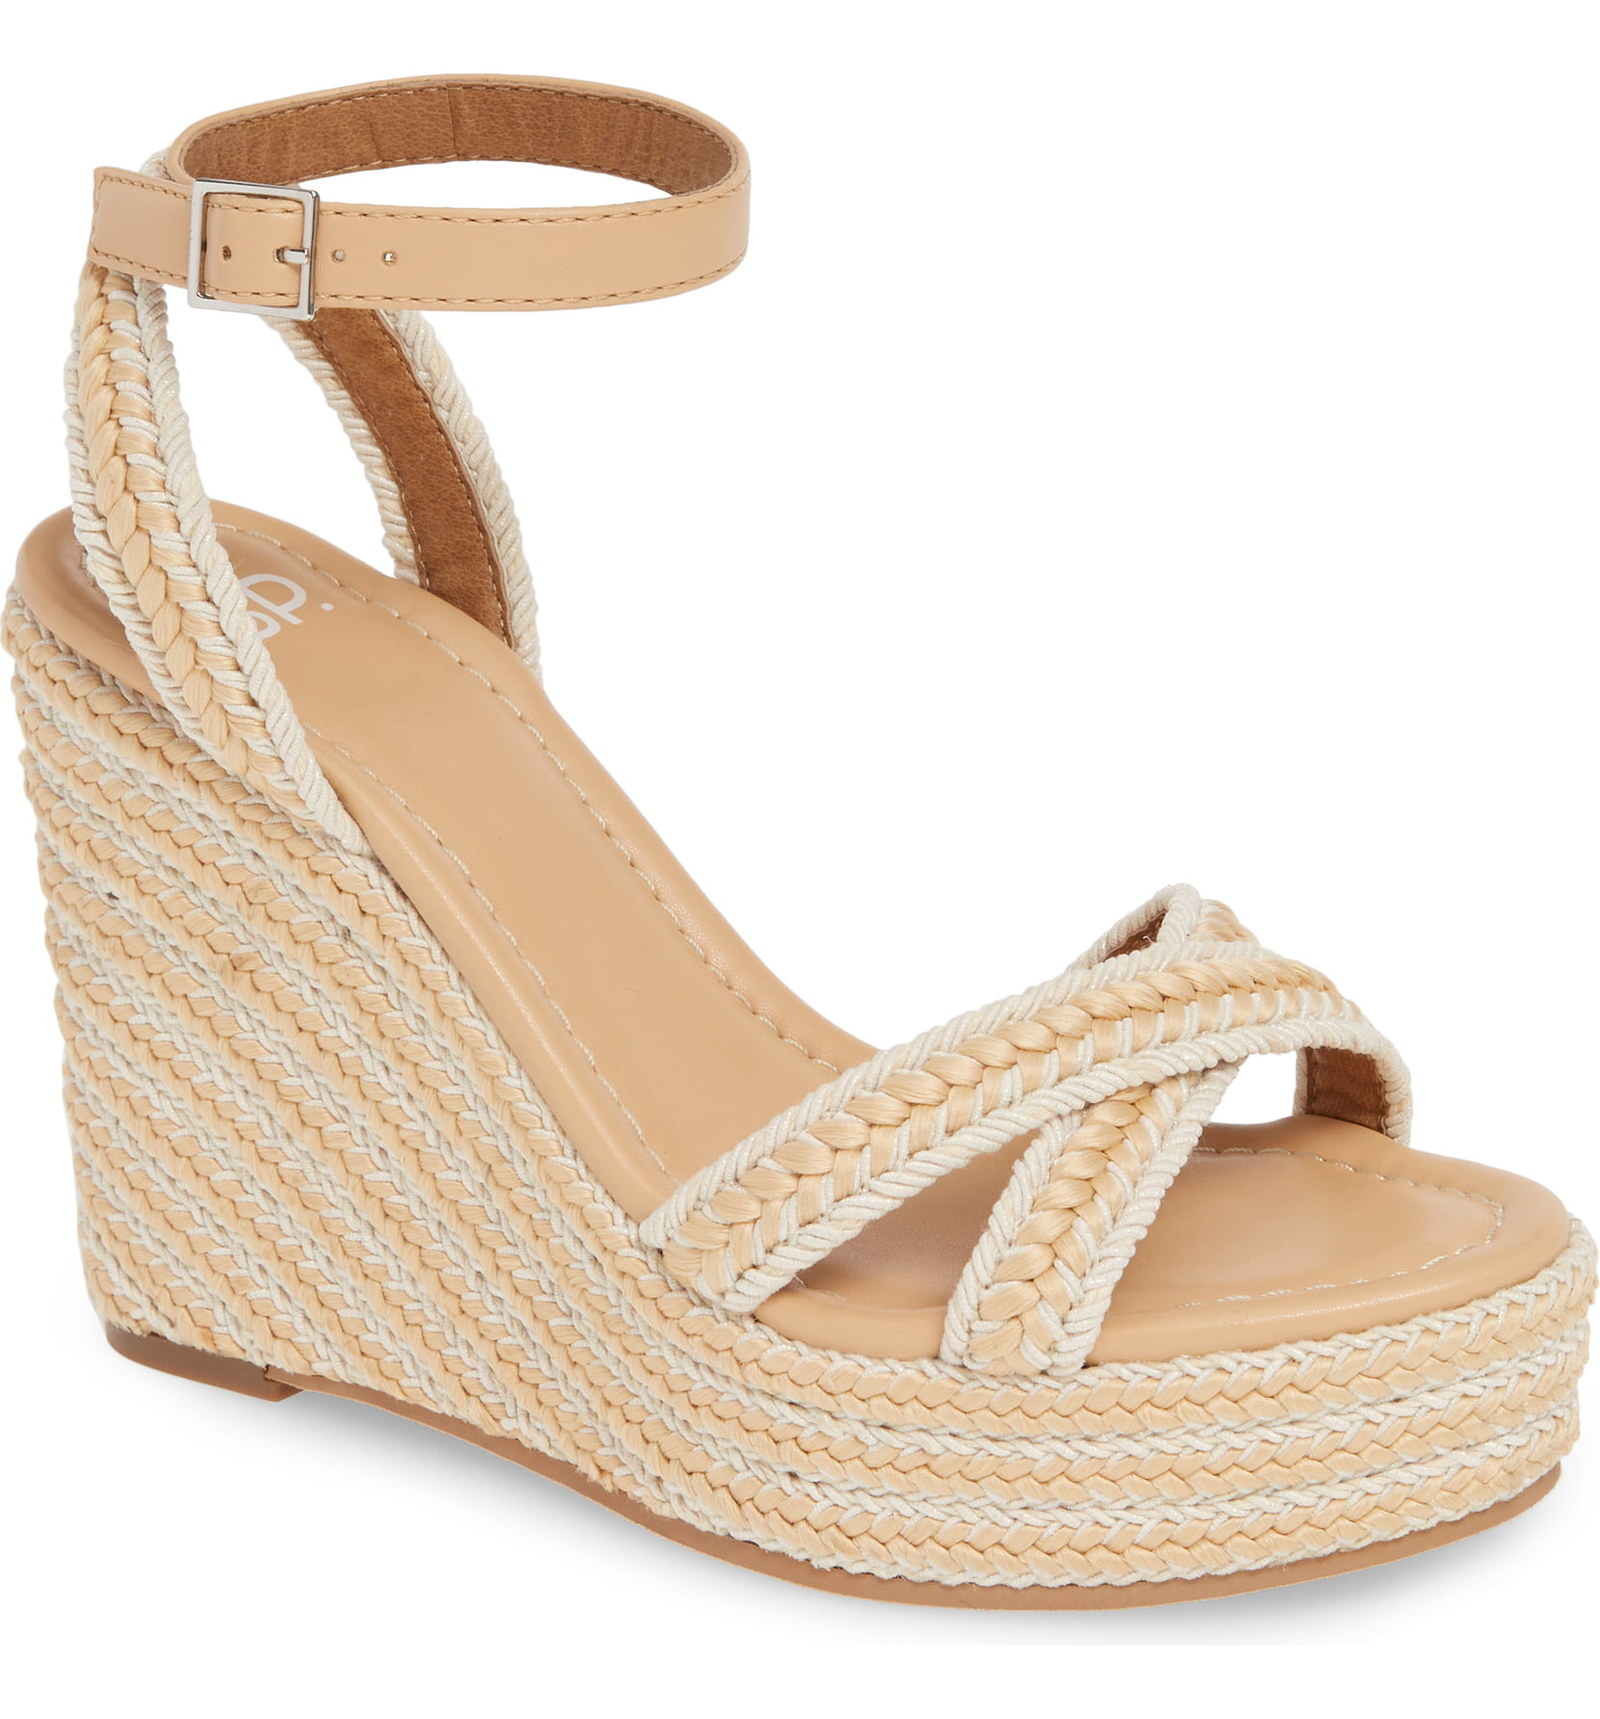 TheBP. Gabby Woven Wedge Sandal in natural woven.
